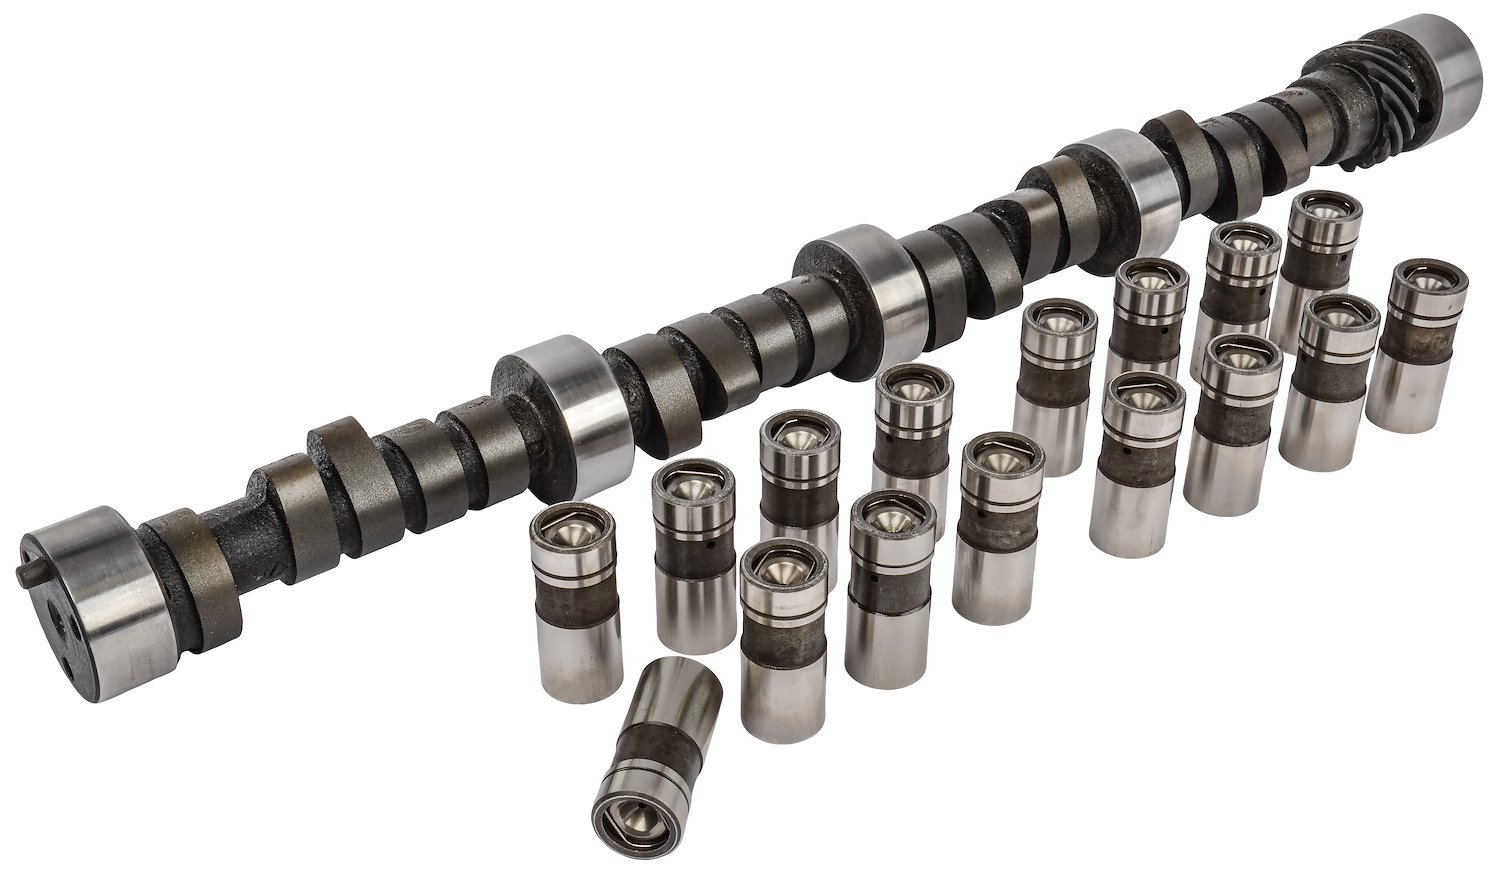 Hydraulic Flat Tappet Camshaft & Lifters for 1957-1985